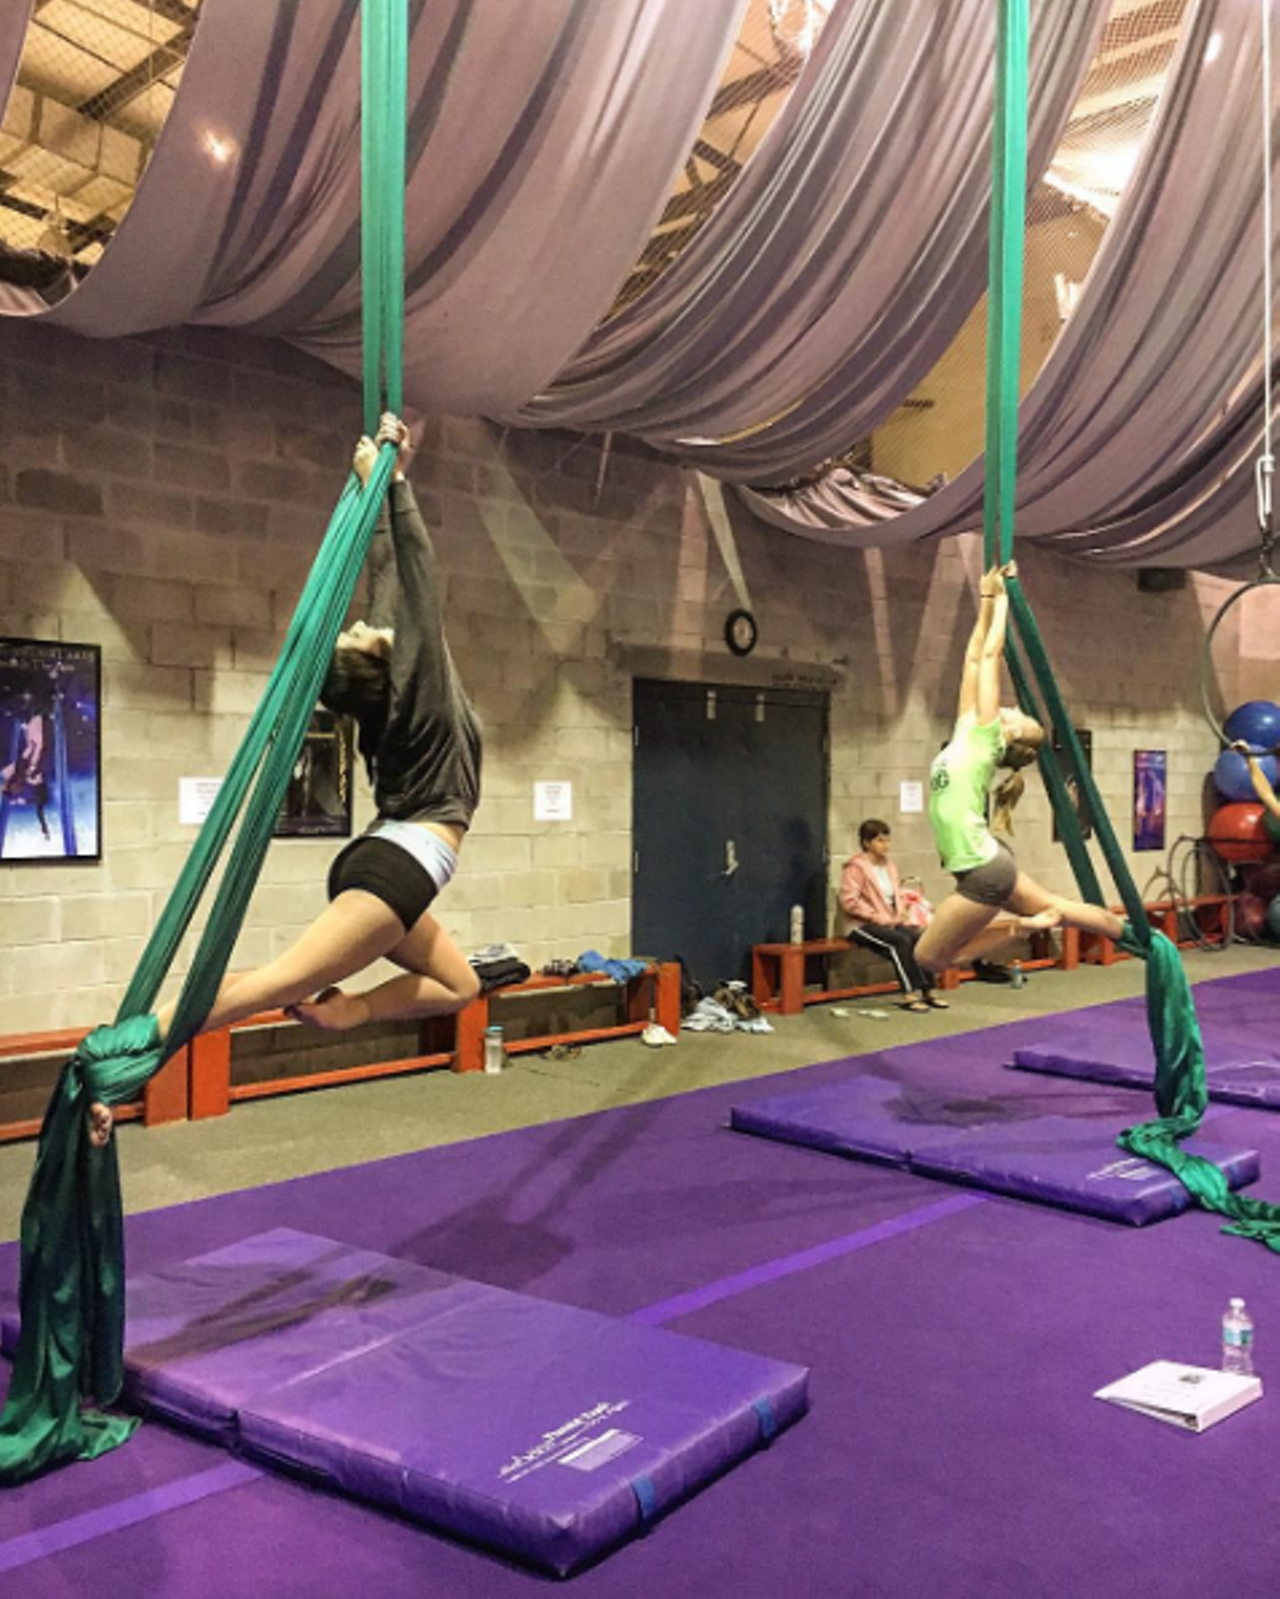  Take an Aerial Silks Class
6700 Kingspointe Pkwy, Orlando, 863-414-8061
If you aspire to become part of Cirque du Soleil or maybe just want to imitate the cool-looking aerial dancers at your favorite pop star&#146;s Grammy performance, Orlando Aerial Arts is a good starting point. All of their aerial silk classes are open to people of all levels and beginners start off with just some basic climbs and poses on the silks. If you actually do aspire to become a professional, they even work with you on developing choreography for your own routines. Classes last about an hour and run you $20. 
Photo via shellatrist/Instagram